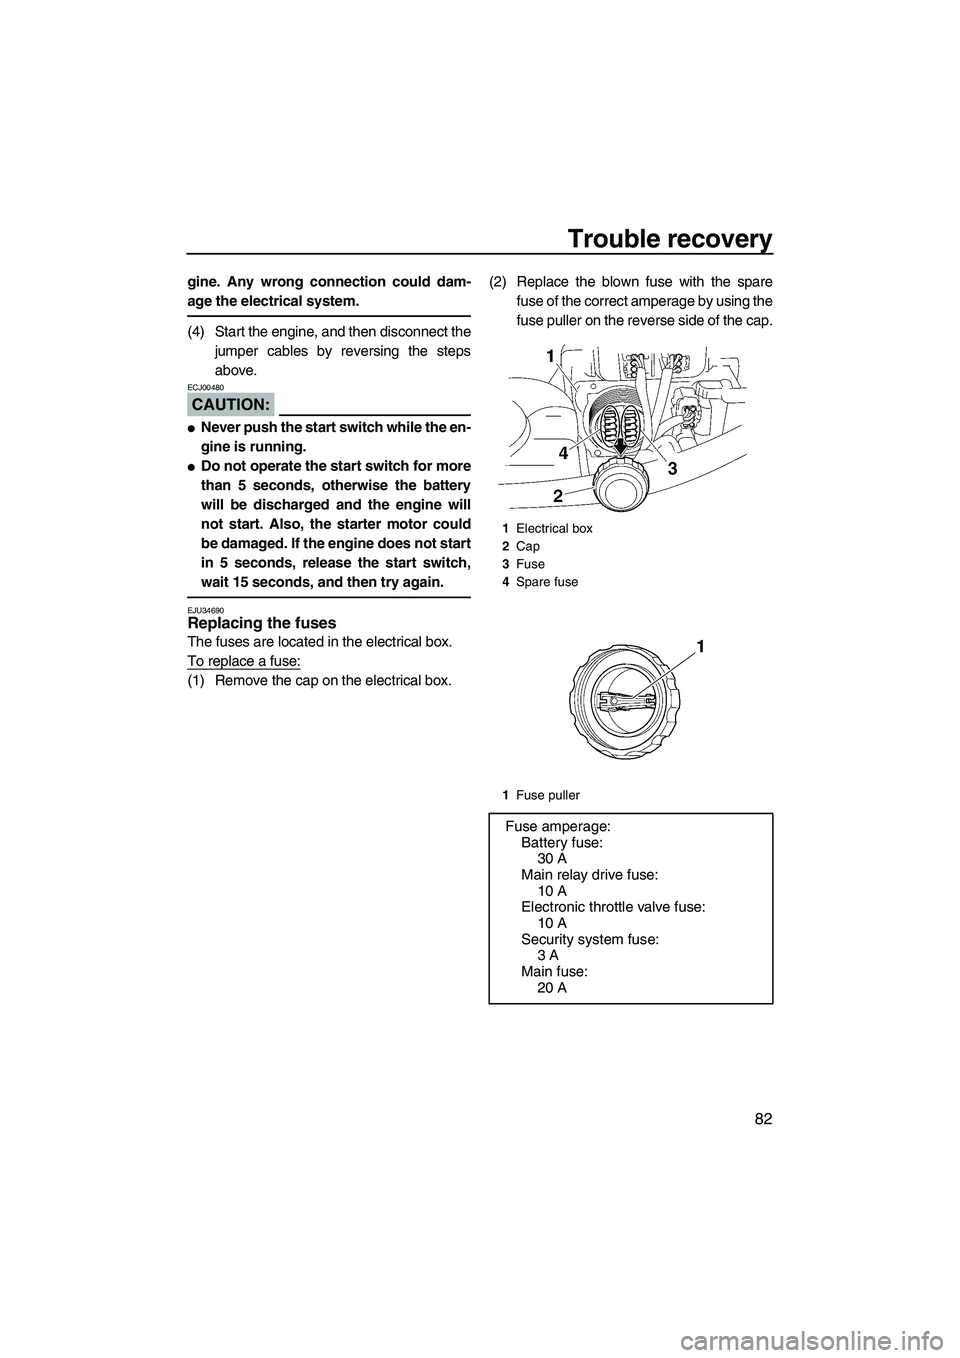 YAMAHA VX 2008  Owners Manual Trouble recovery
82
gine. Any wrong connection could dam-
age the electrical system.
(4) Start the engine, and then disconnect the
jumper cables by reversing the steps
above.
CAUTION:
ECJ00480
Never 